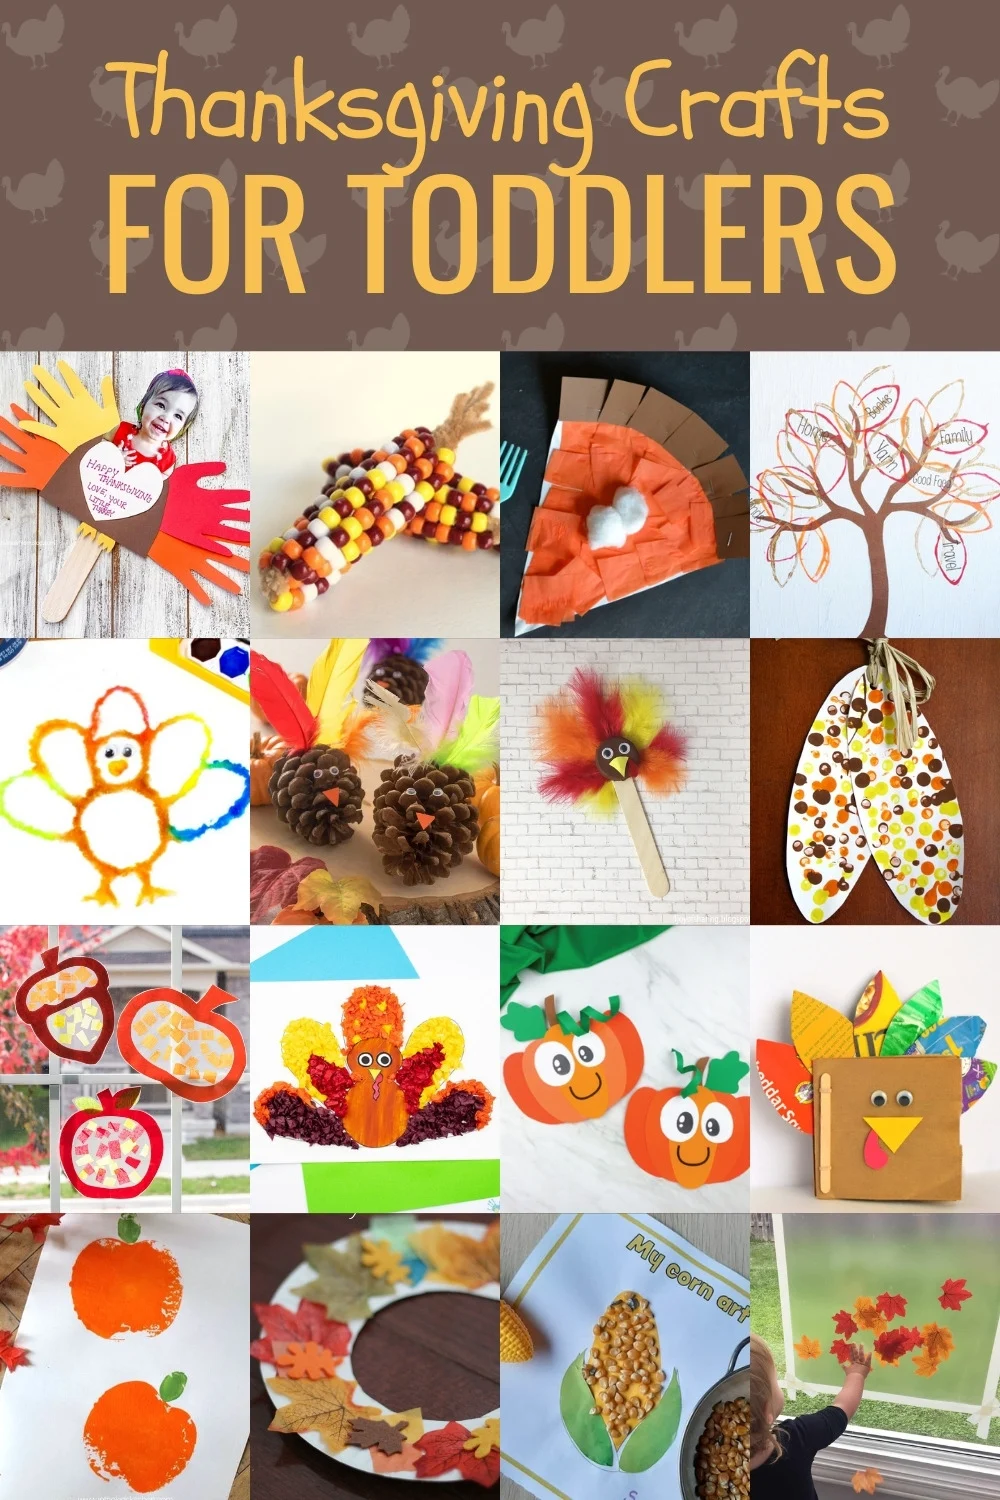 The Best Art & Craft Supplies for Kids - Happy Toddler Playtime